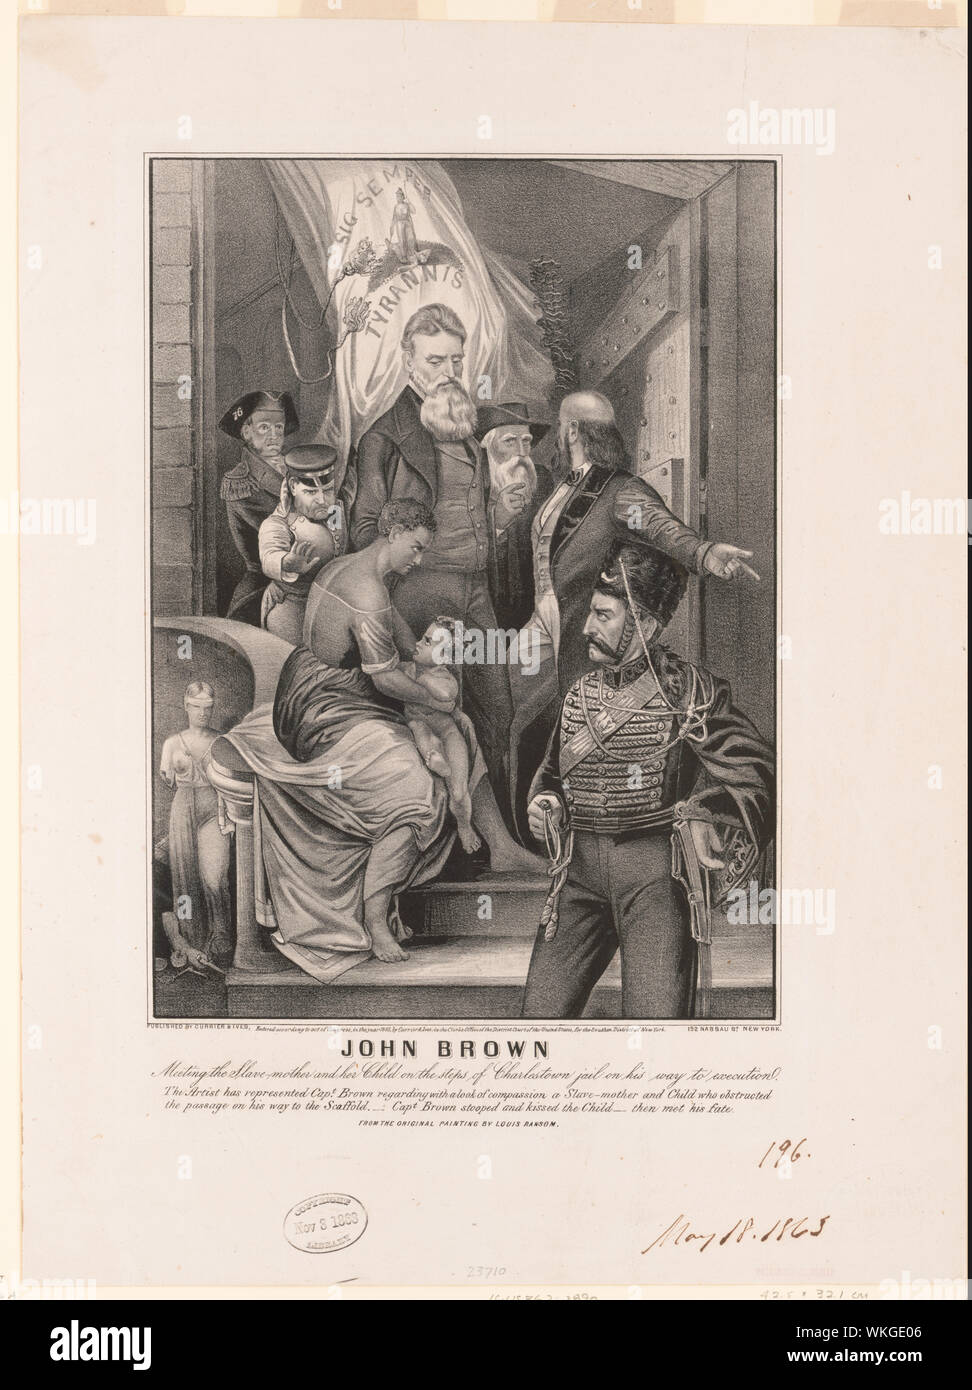 1972 Vintage Currier & Ives "JOHN BROWN" THE ABOLITIONIST B&W Print Lithograph 